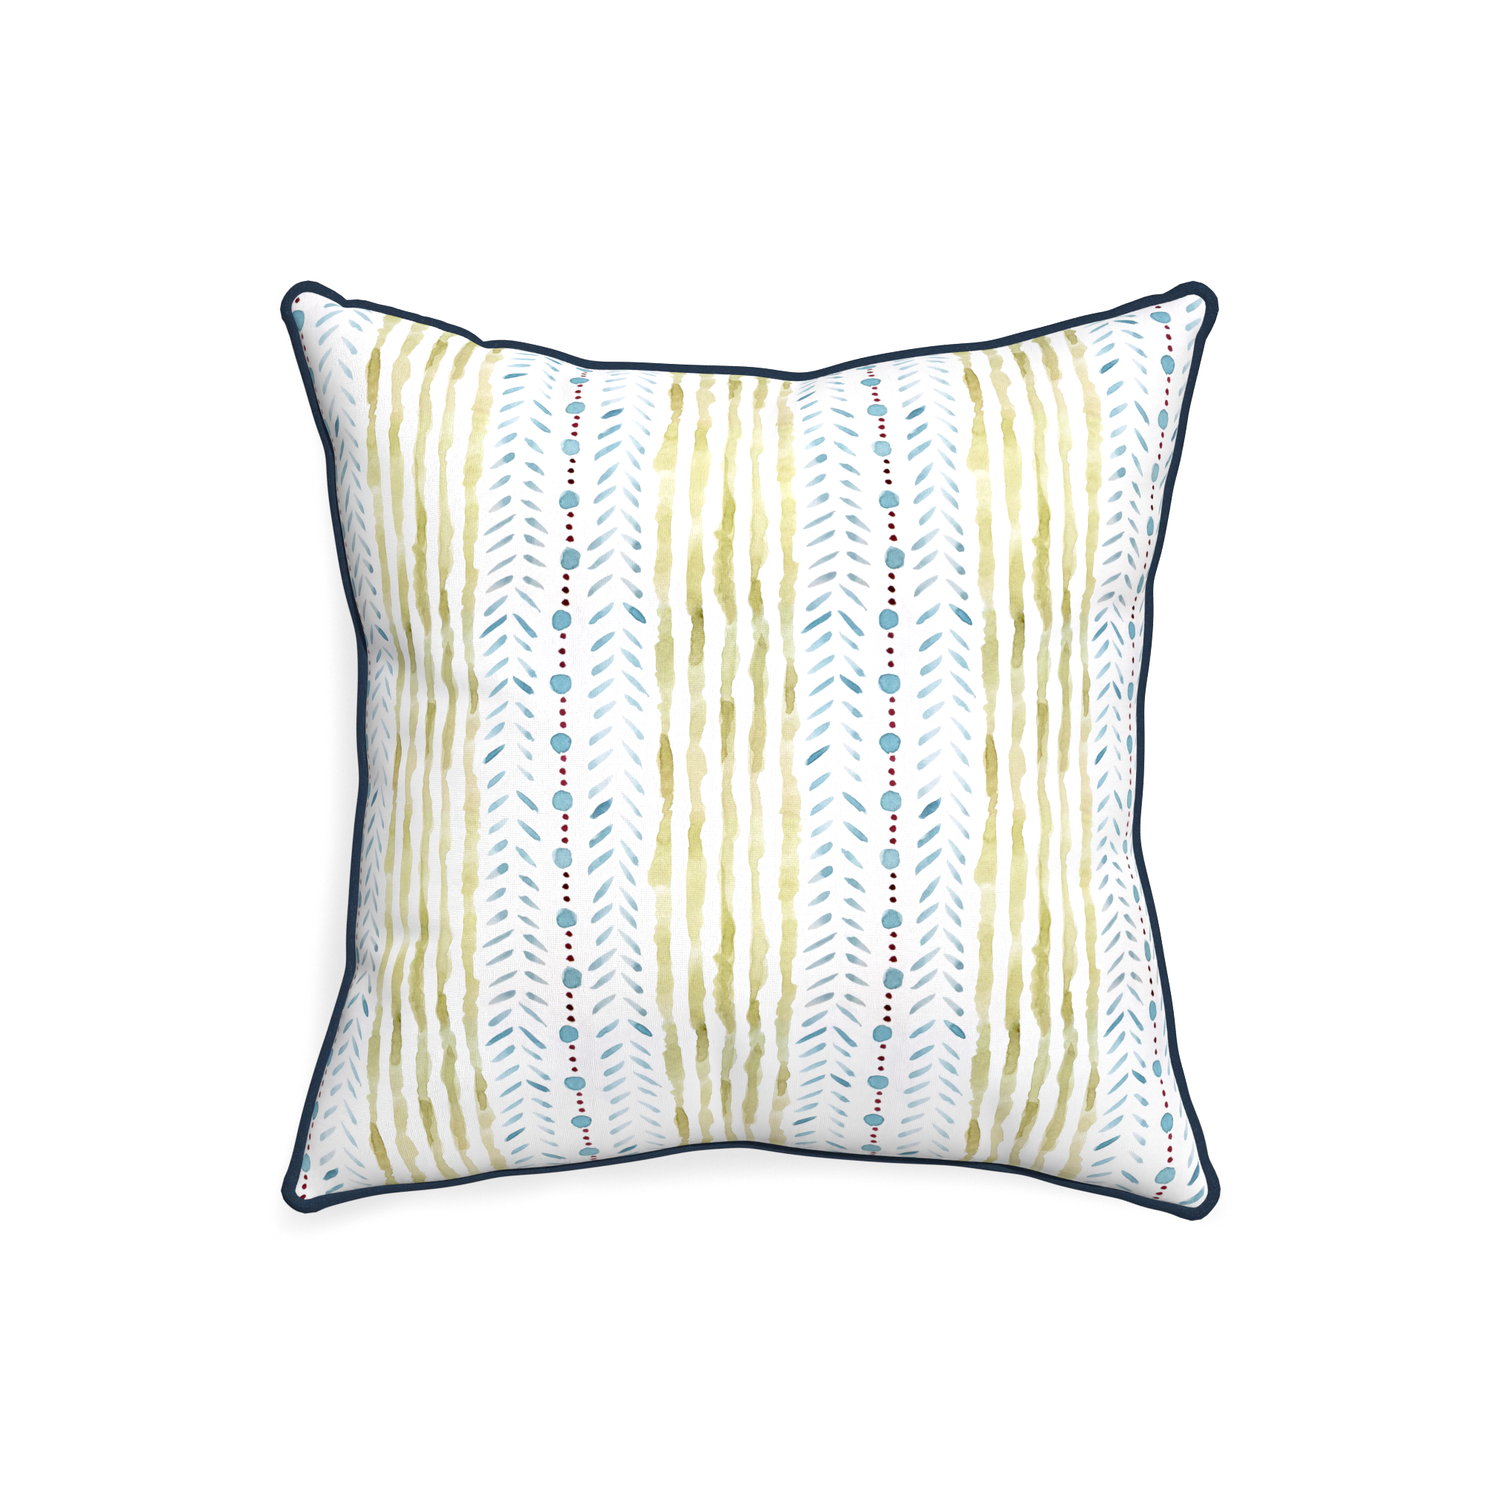 20-square julia custom blue & green stripedpillow with c piping on white background